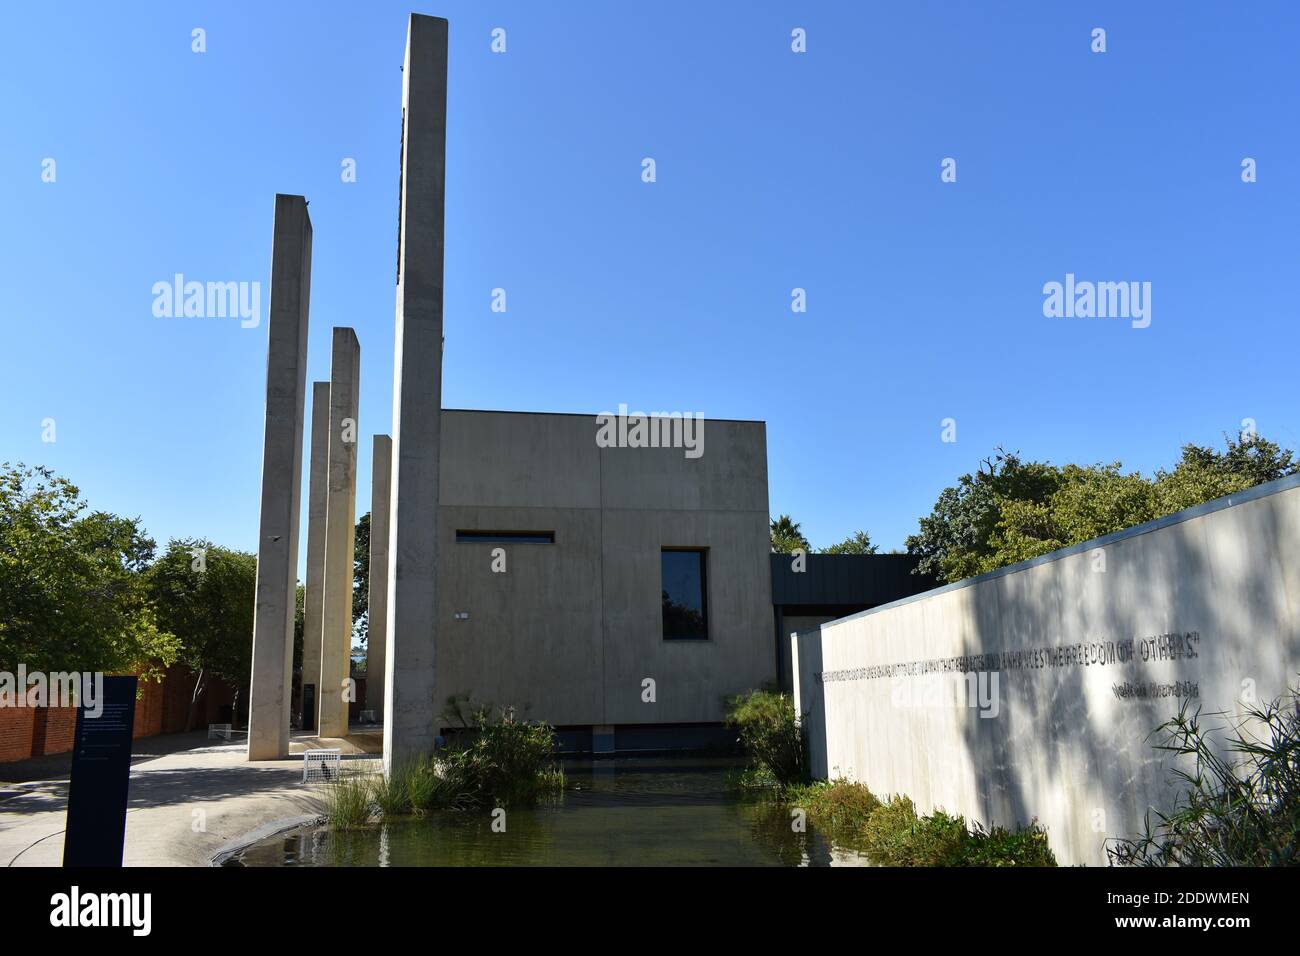 The Pillars of the Constitution, an exhibition in the Apartheid Museum in Johannesburg, South Africa. The white building contrasts with the blue sky. Stock Photo